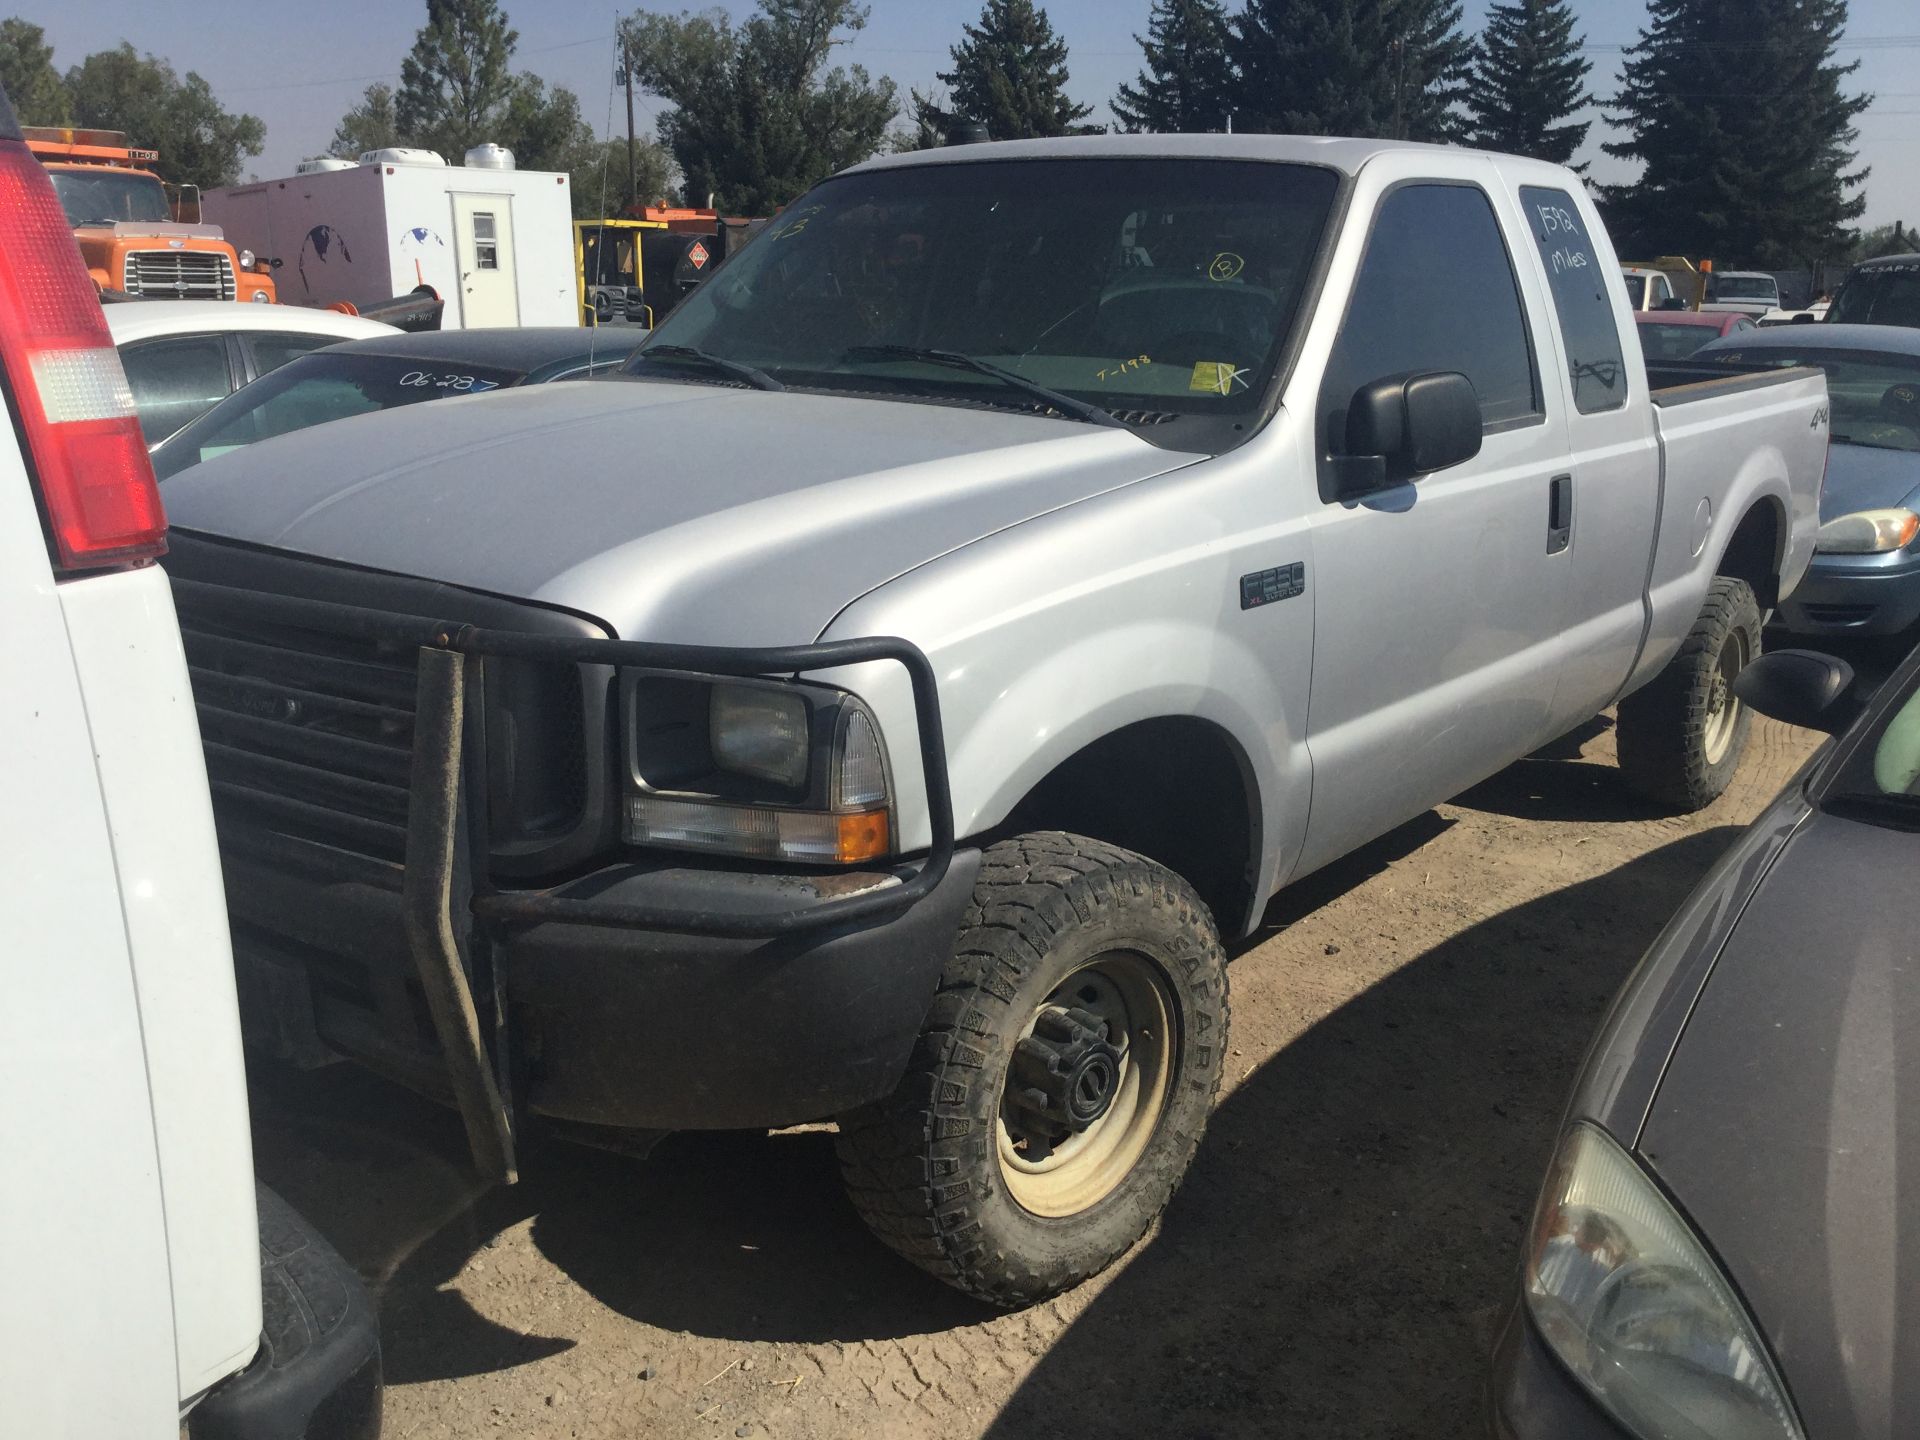 Year: 2004 Make: Ford Model: 3/4T Type: Pickup Vin#: C00756 Mileage/Hours: 186666 5.4L, 4x4, 6 spd,